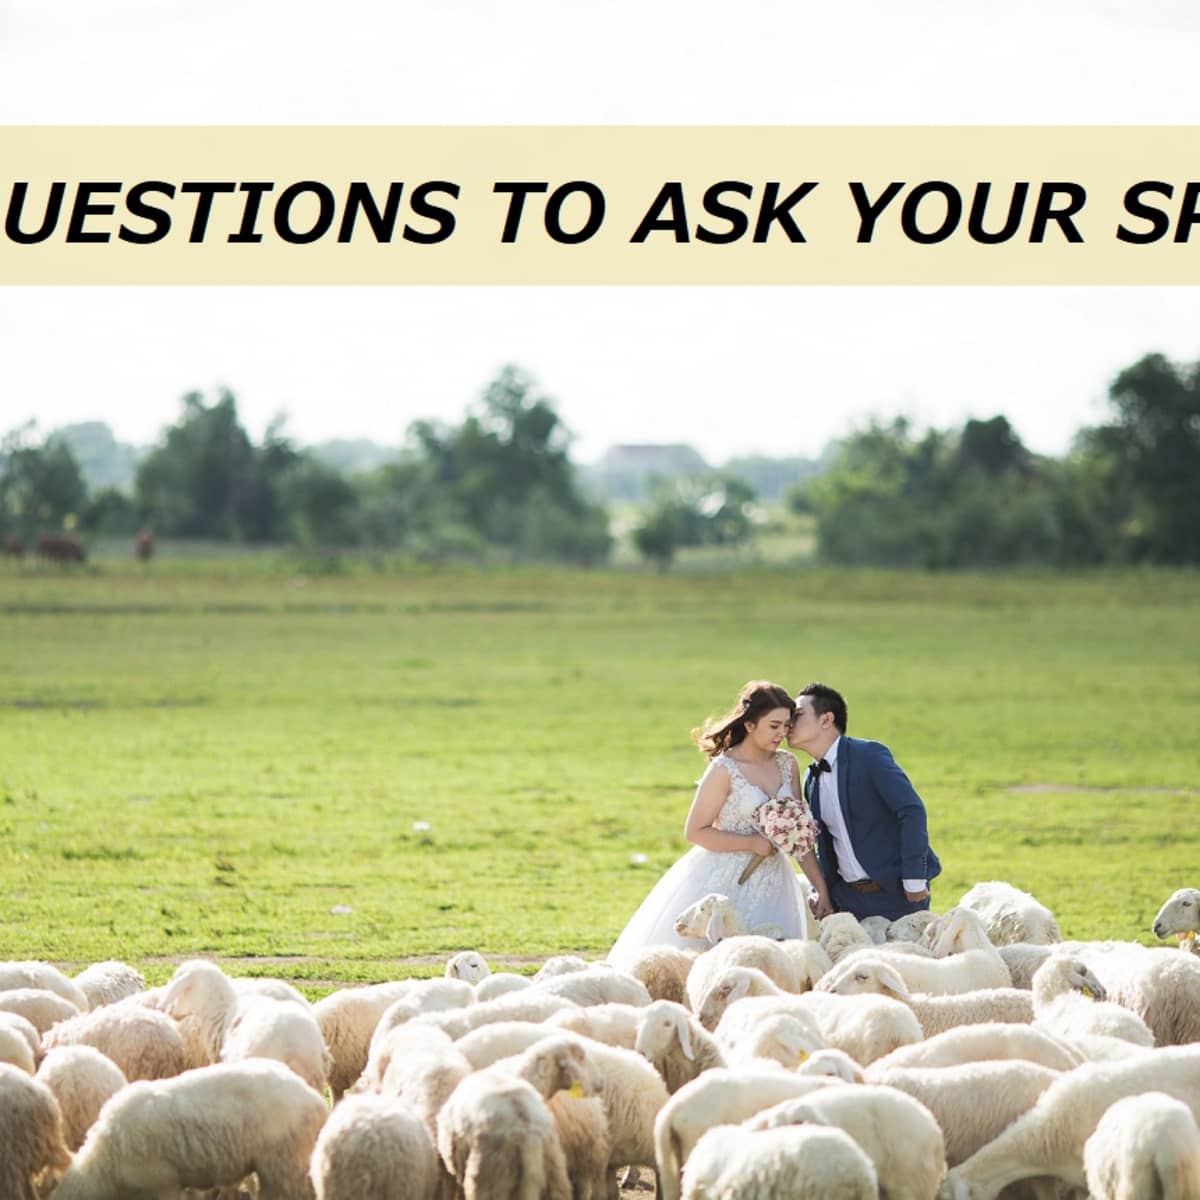 150+ Fun Questions to Ask Your Spouse - PairedLife